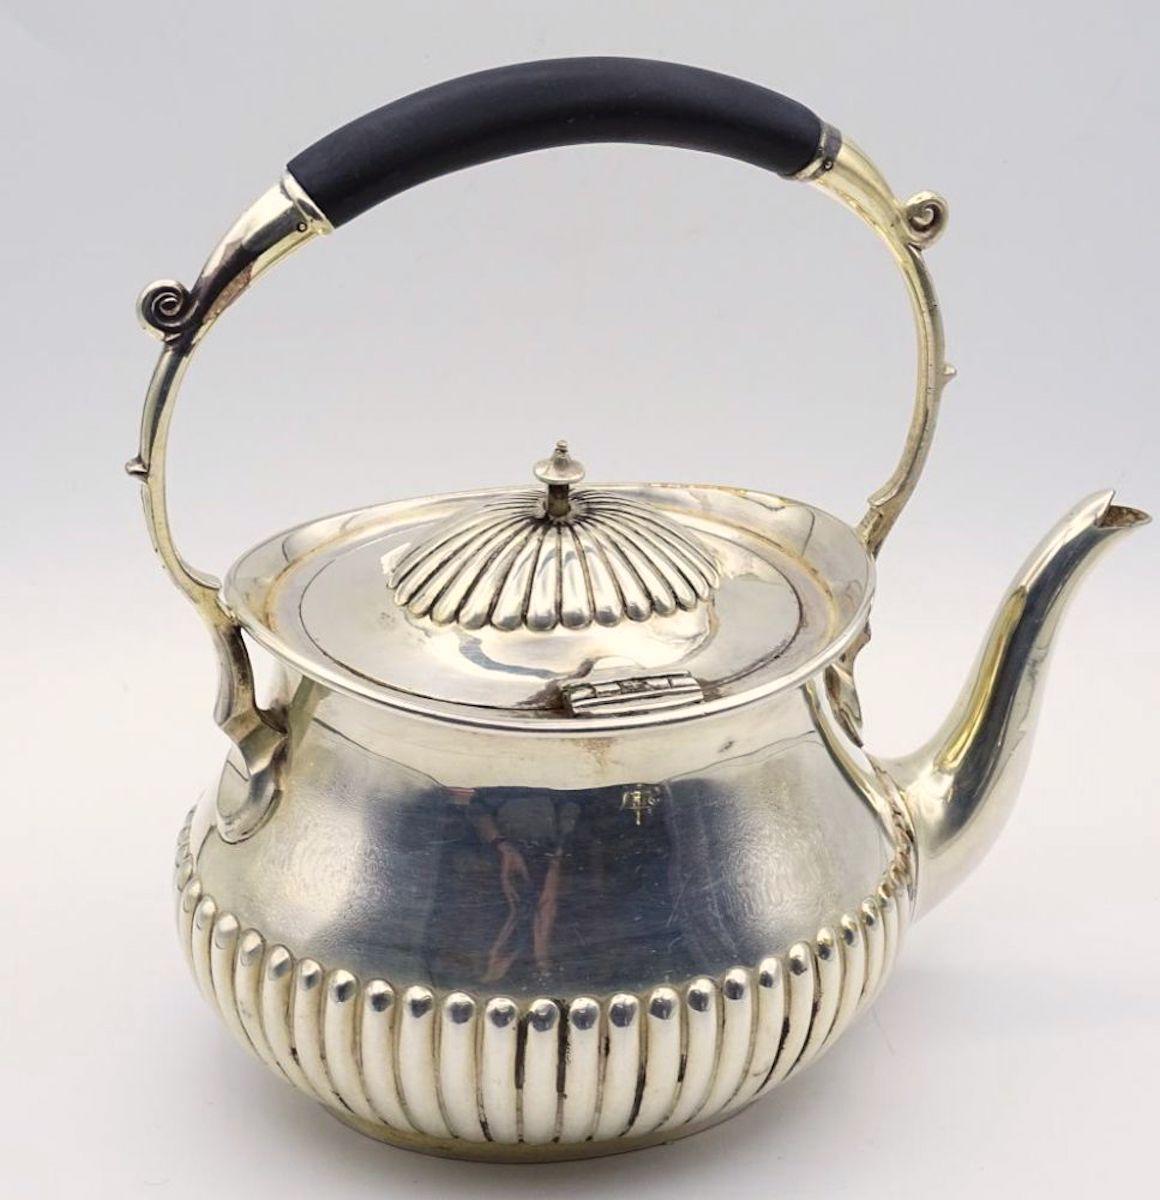 European Vintage Silver-Plated Teapot with Horn Handle, Europe, Early 20th Century